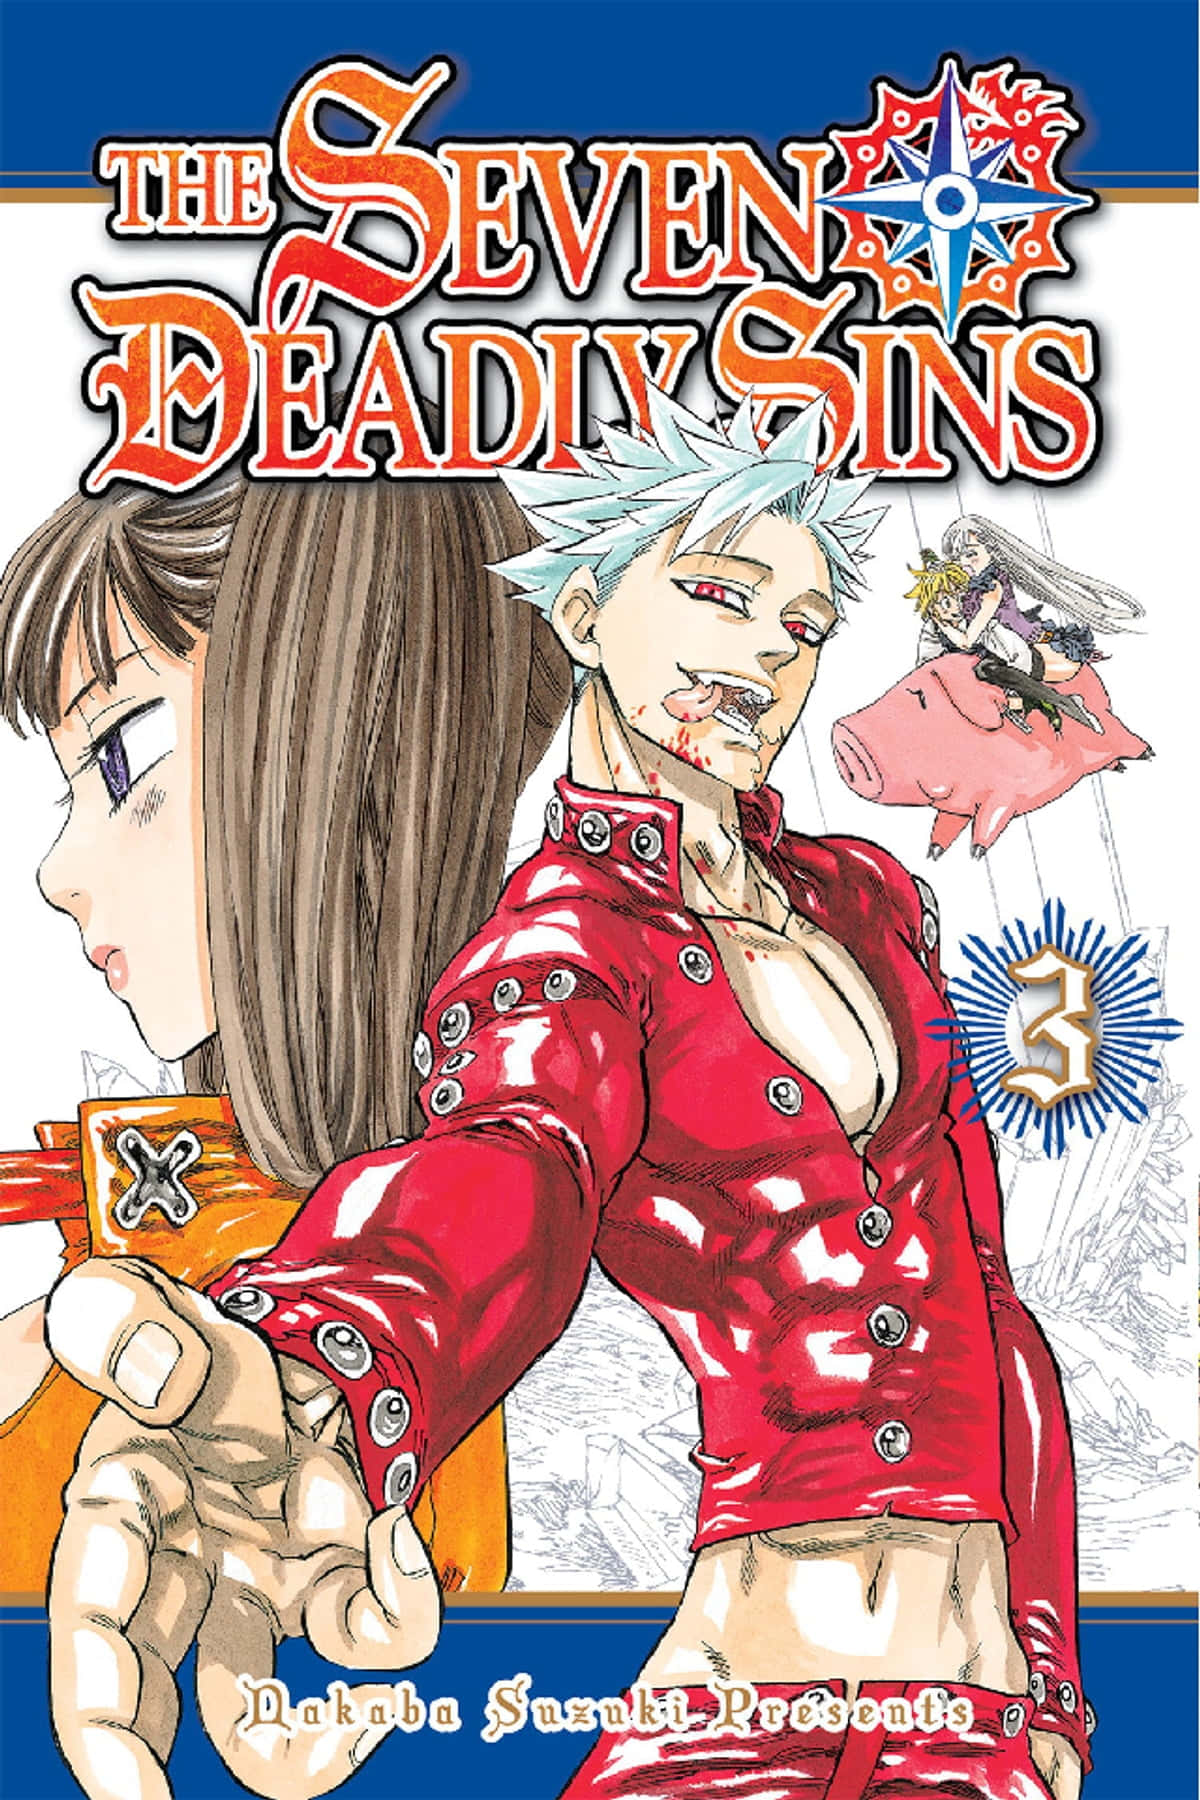 Pride, Greed, Lust, Envy, Gluttony, Wrath, and Sloth - the Seven Deadly Sins Wallpaper